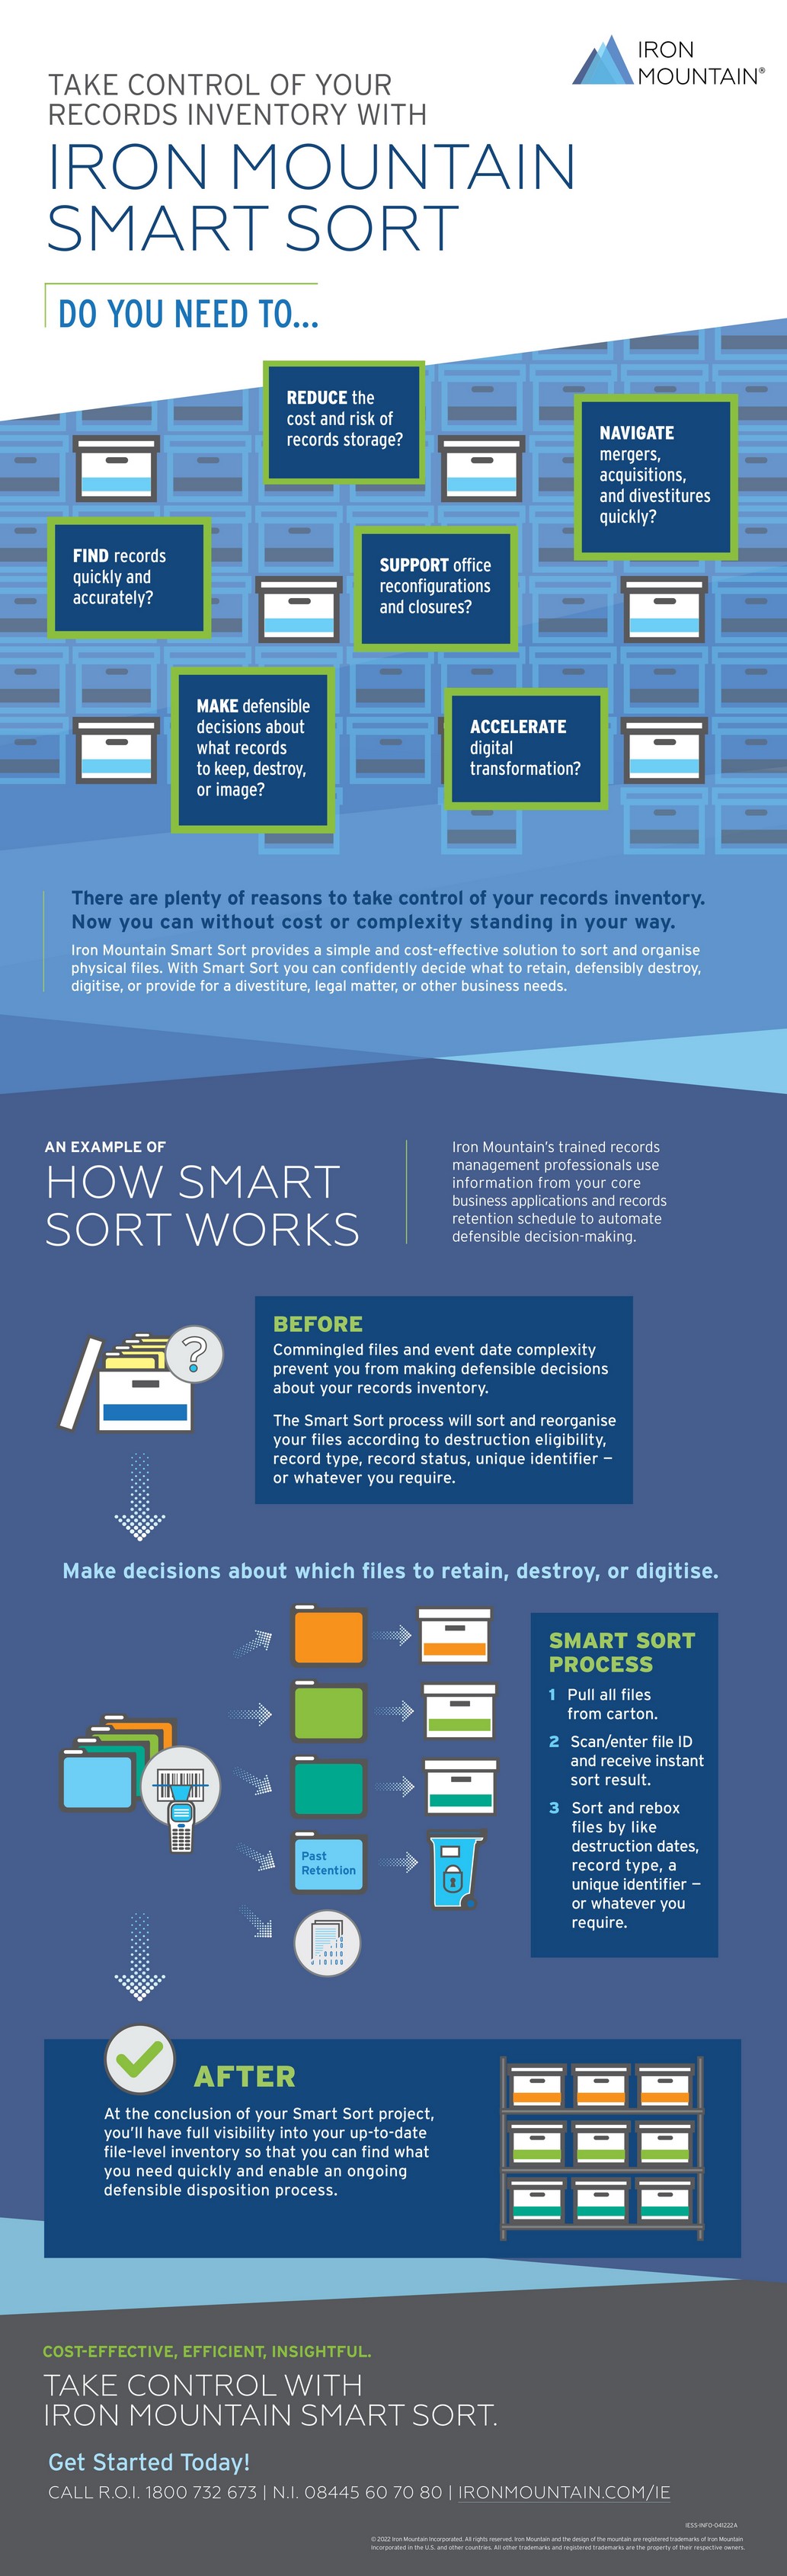 Take control of your records inventory with Iron Mountain Smart Sort Infographic